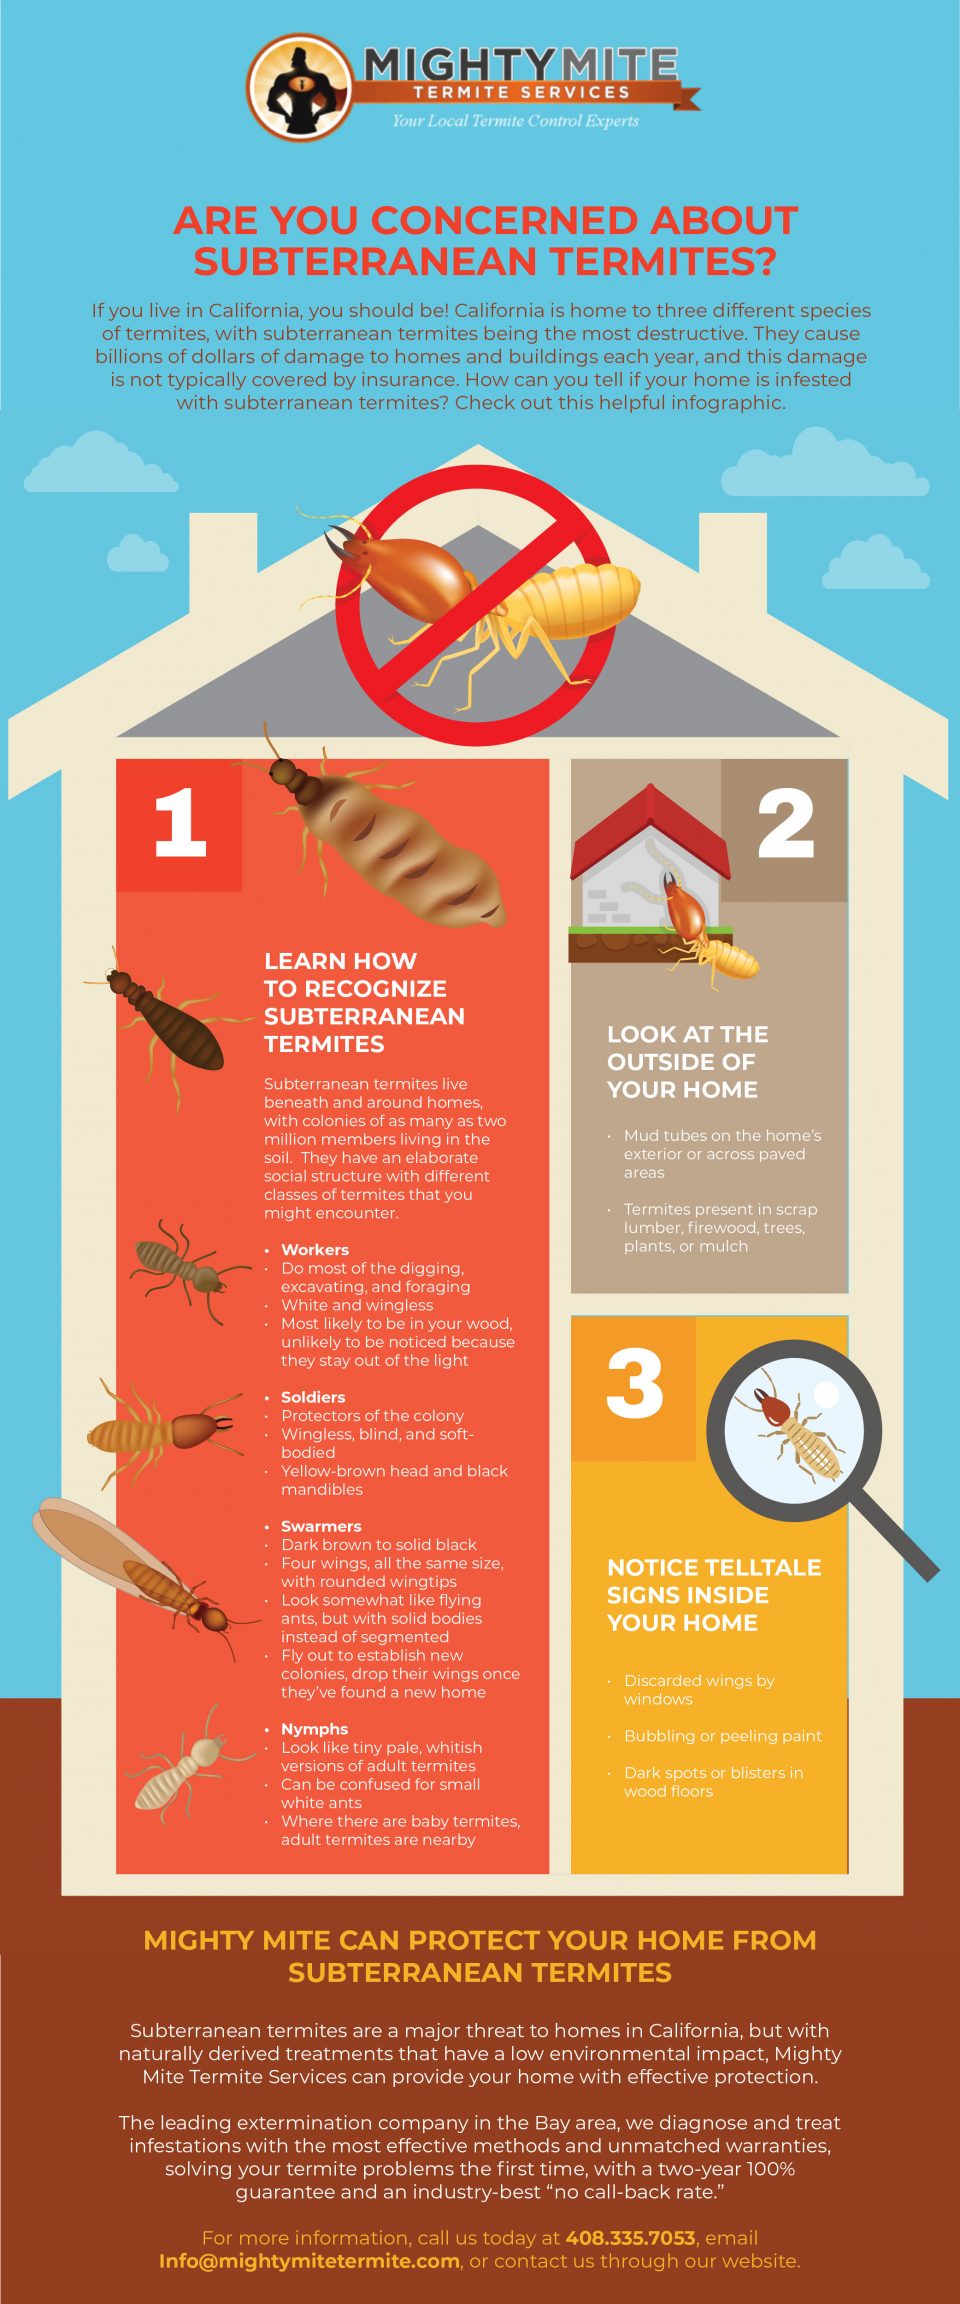 Are You Concerned About Subterranean Termites?